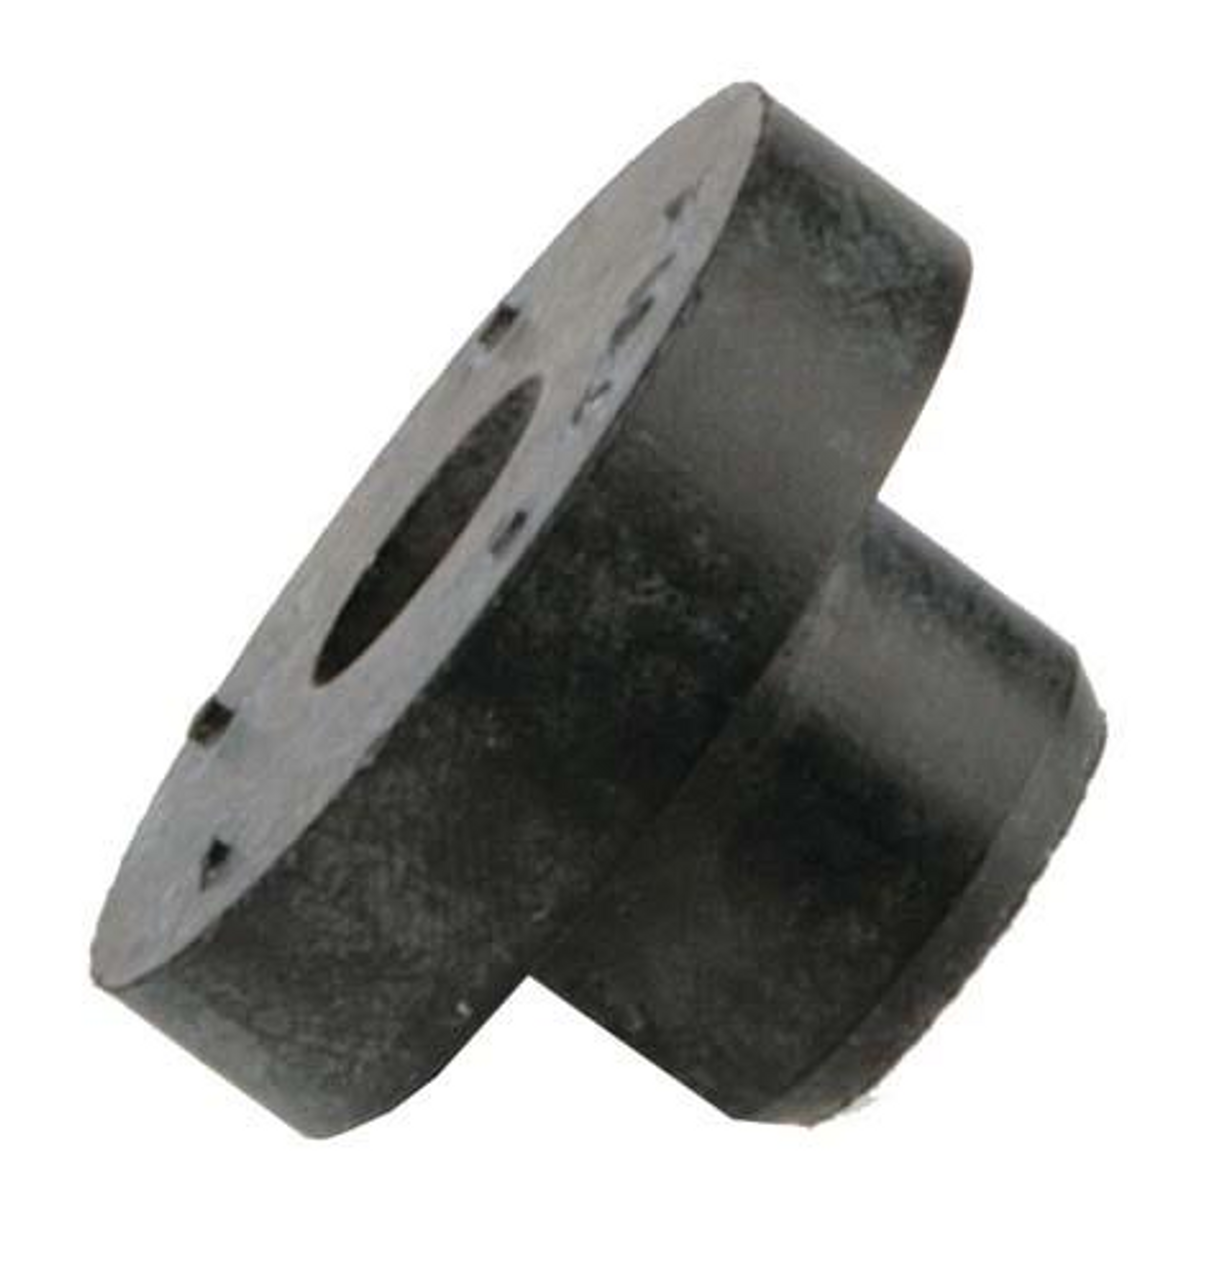 Yamaha Fuel Pipe Joint Grommet (G22-G29/Drive), 7800, JU5-F4375-00